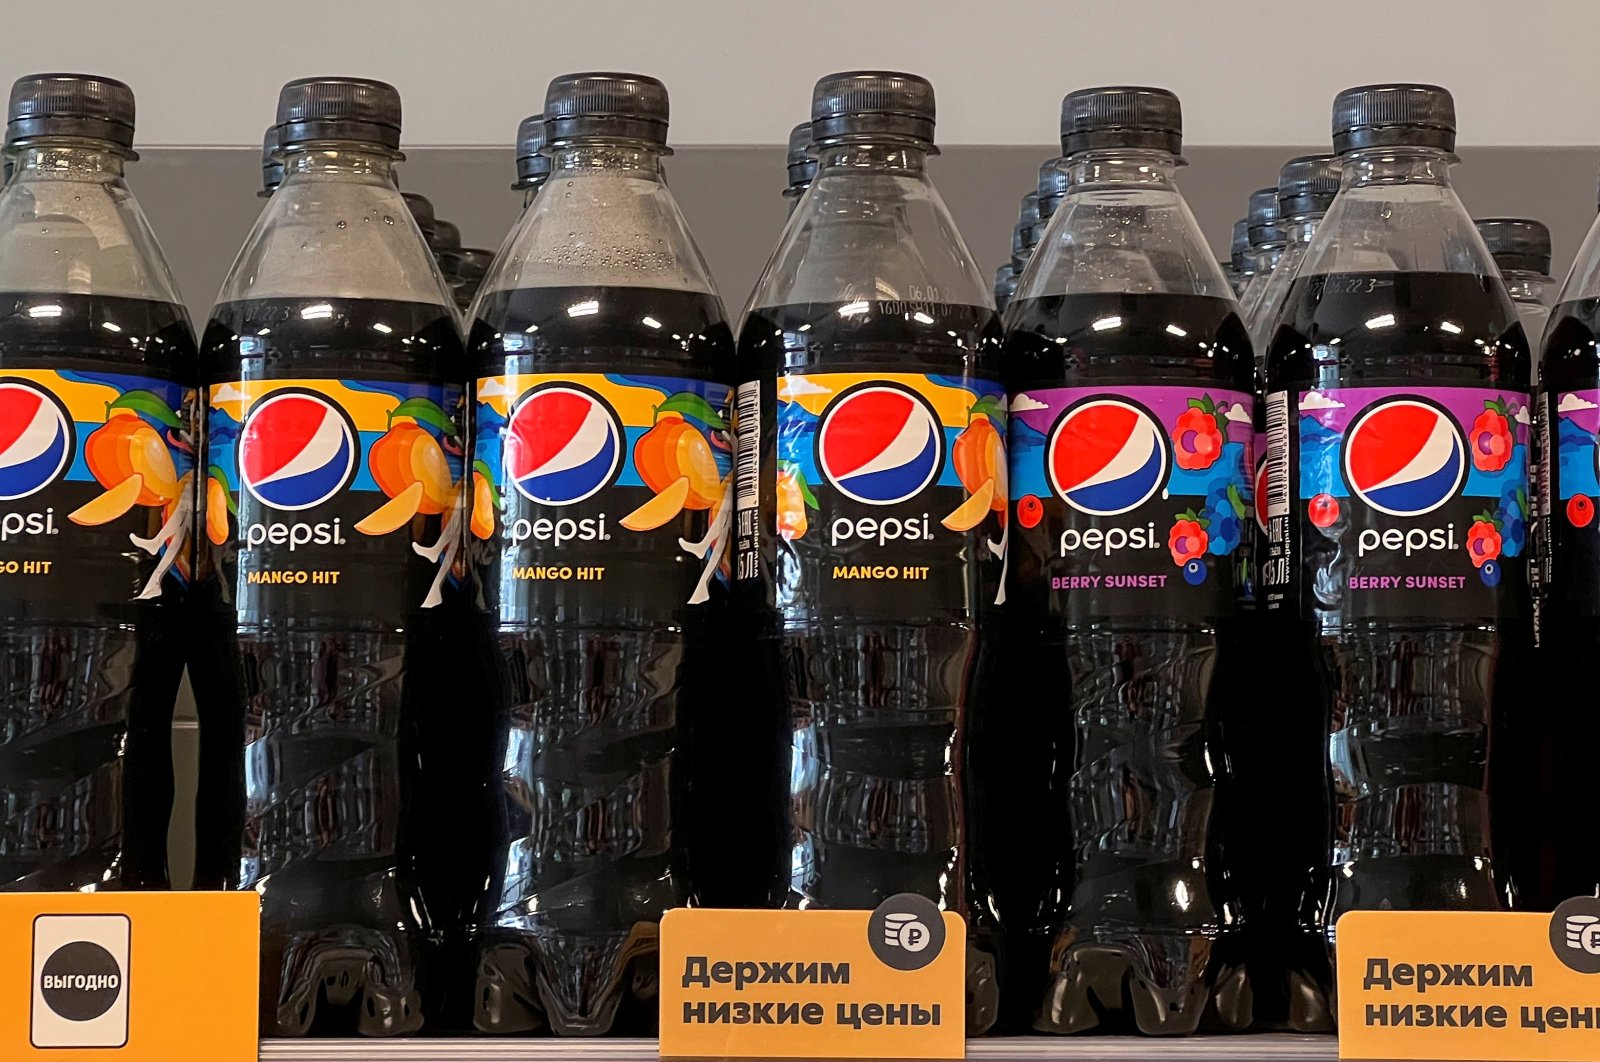 A view shows a shelf with bottles of Pepsi at a grocery store in Moscow, Russia, Sept. 9, 2022. (Reuters Photo)